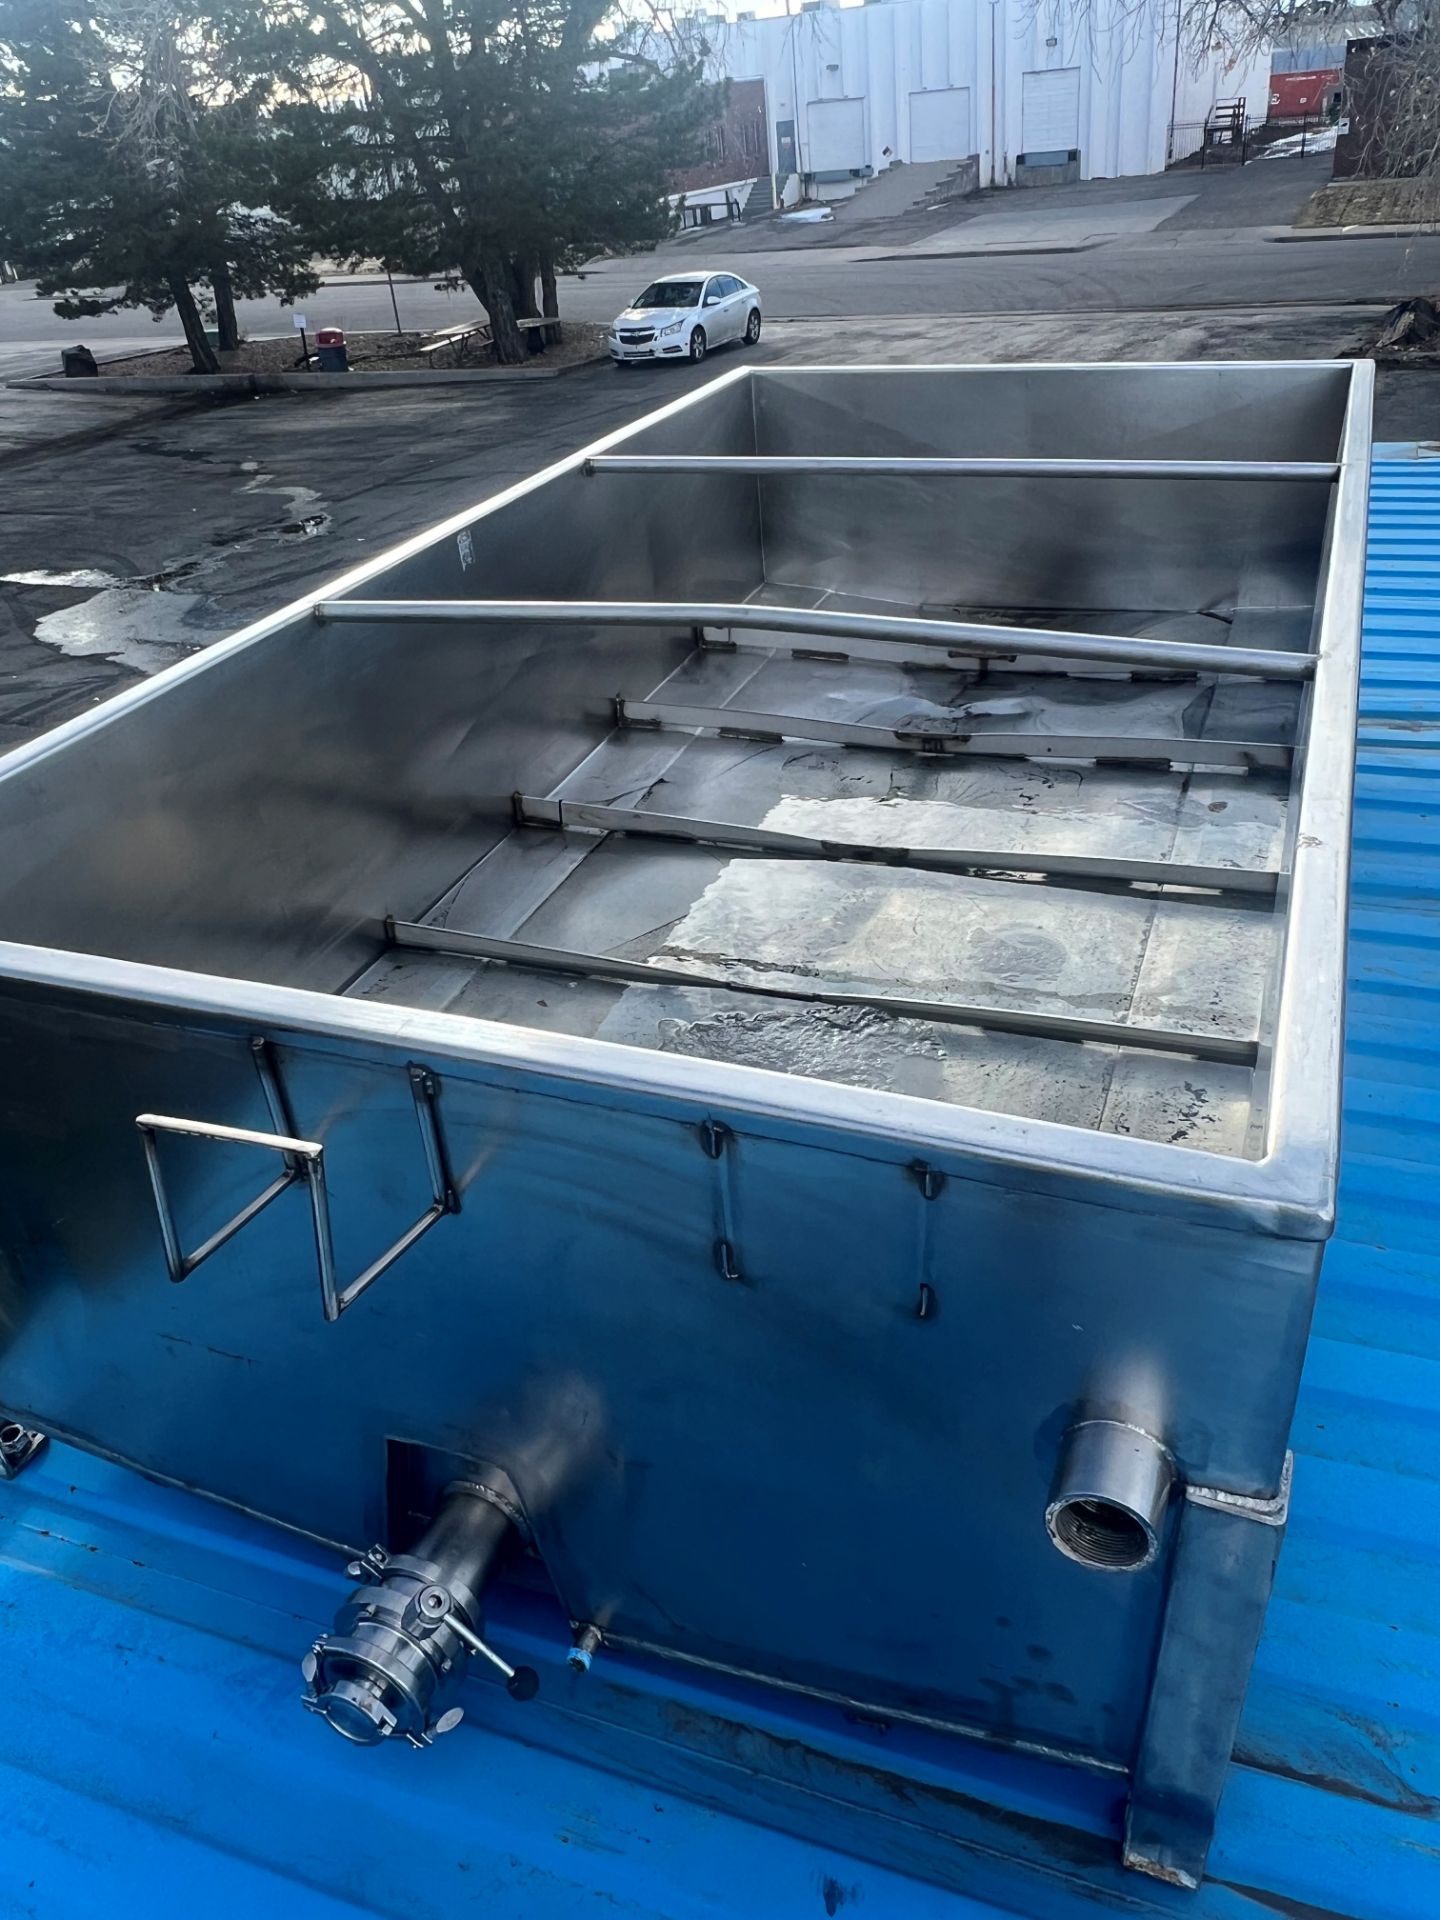 Aprox. 10 x 5 x 3 Open Top Tank (Loading Fee $200) (Located Denver, CO 80239) - Image 2 of 2